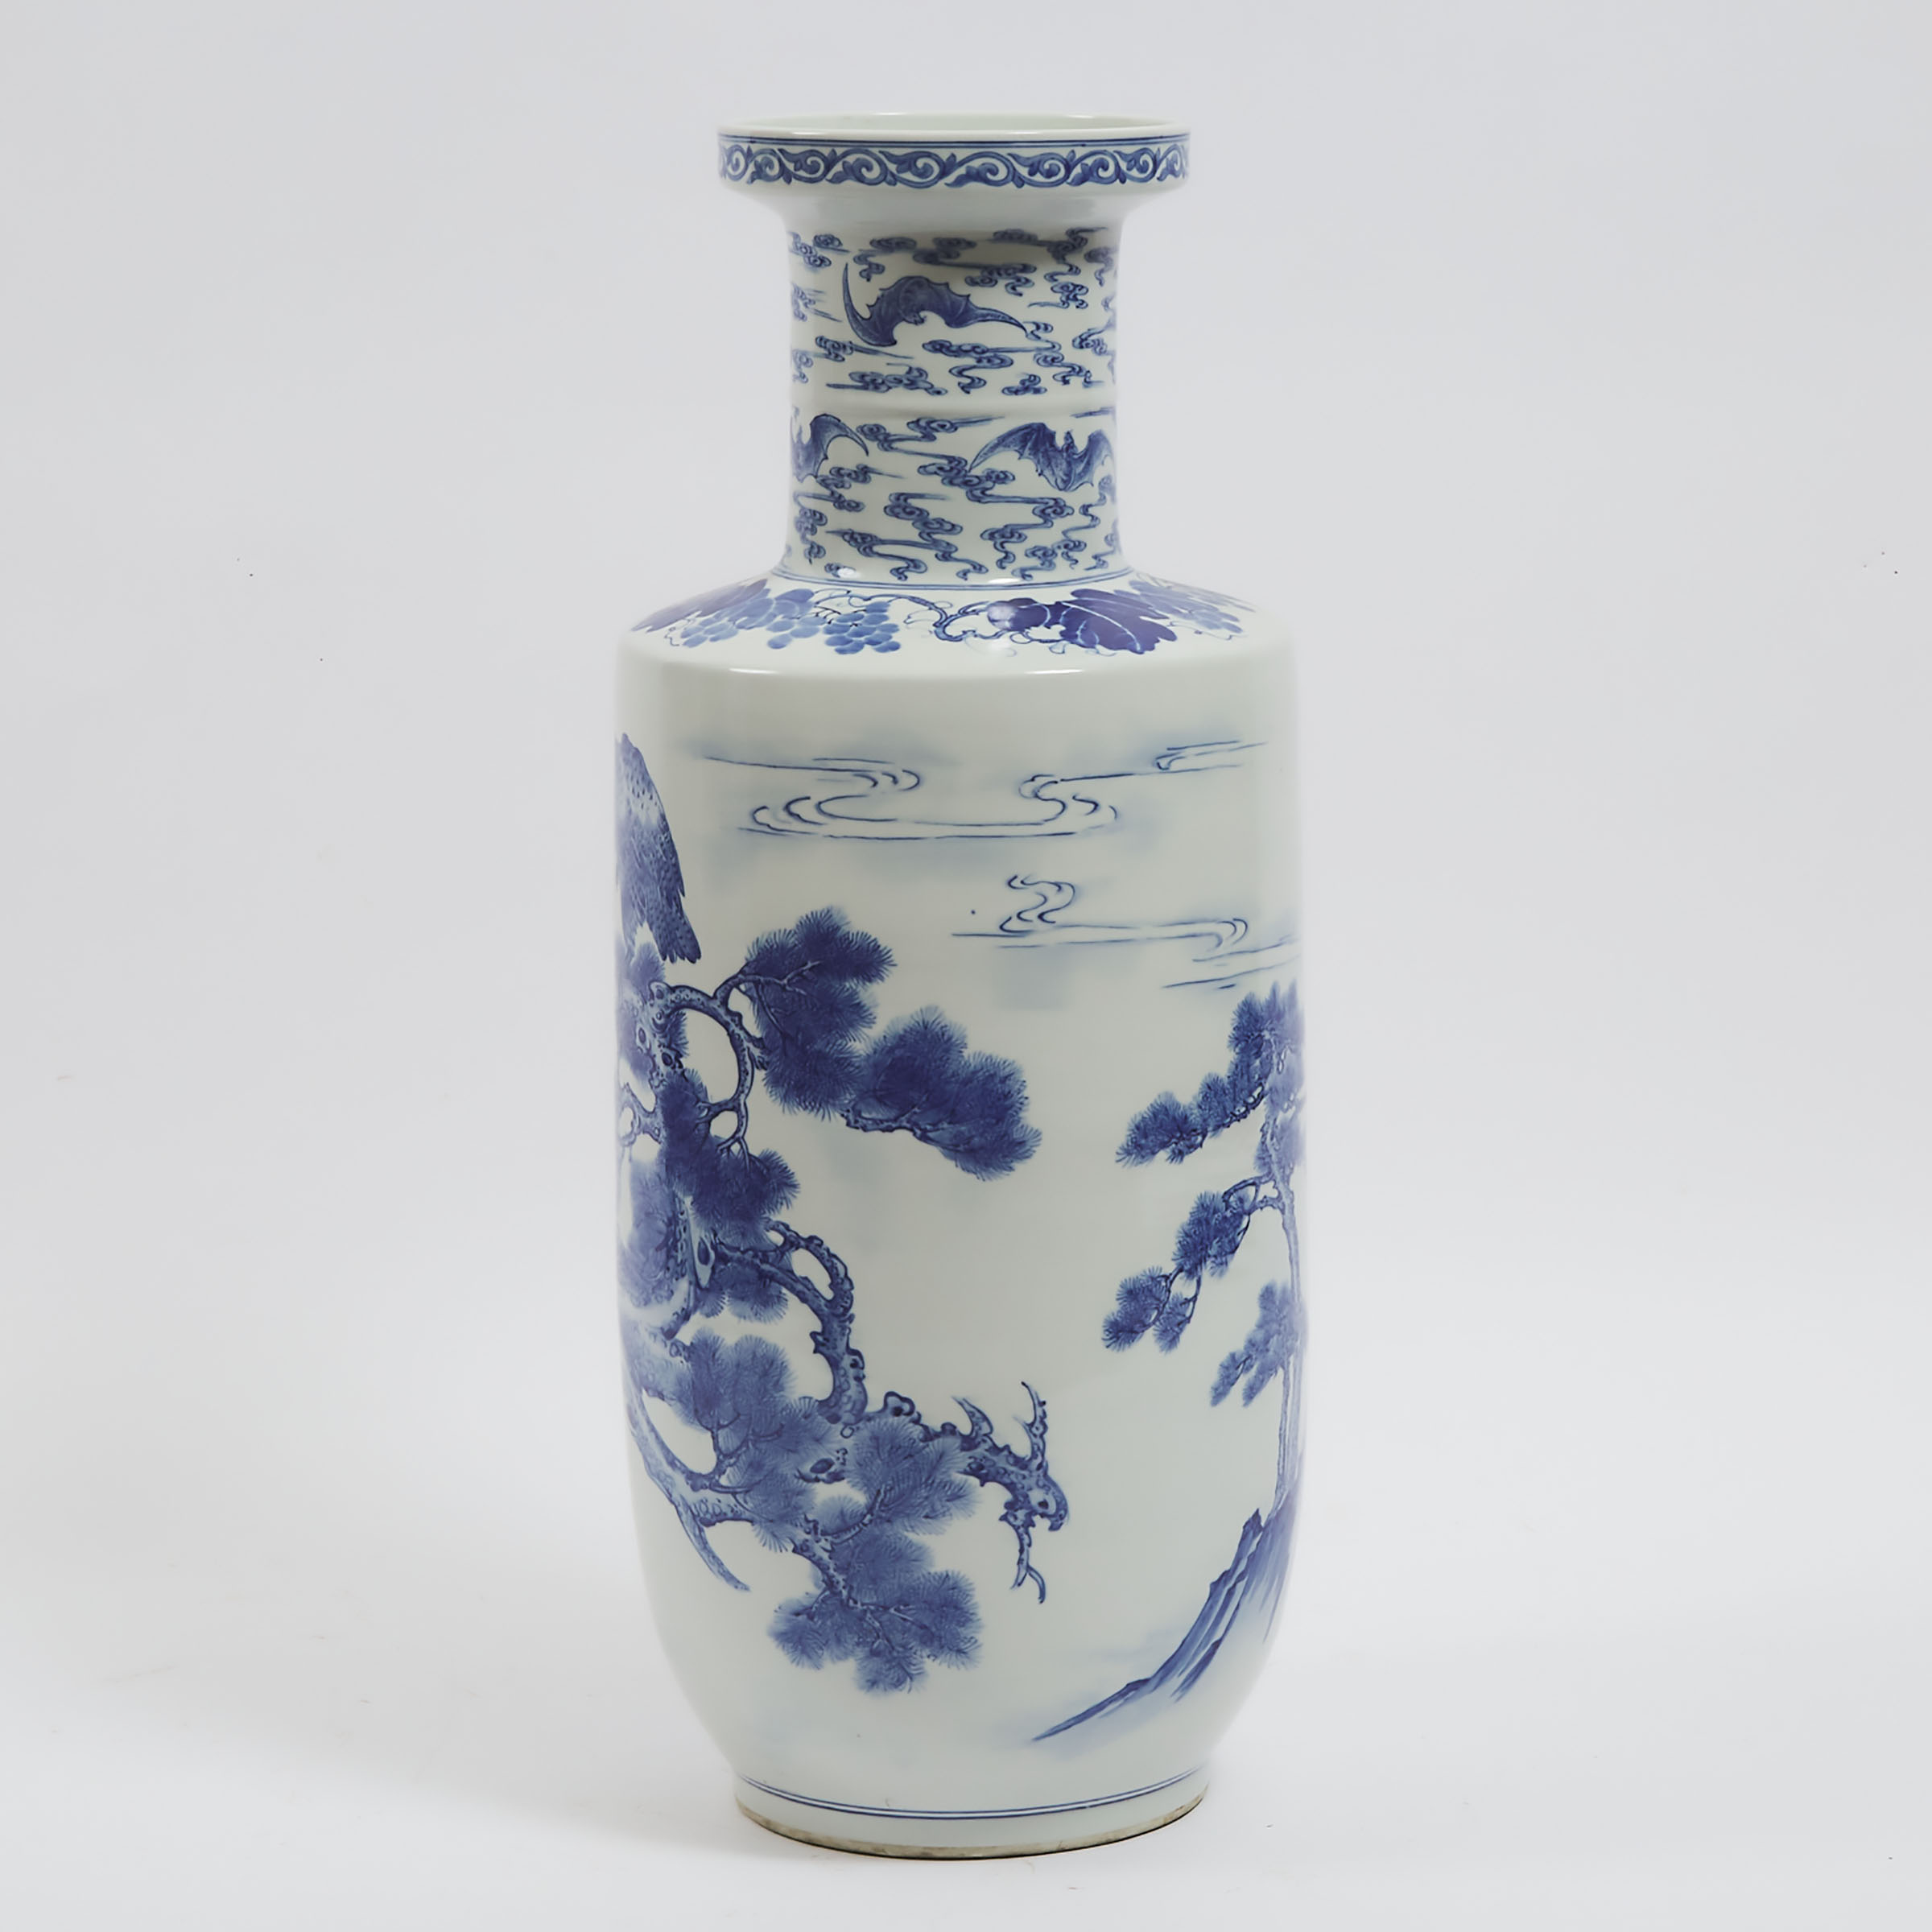 A Large Blue and White 'Birds and Pine' Vase, Early to Mid 20th Century